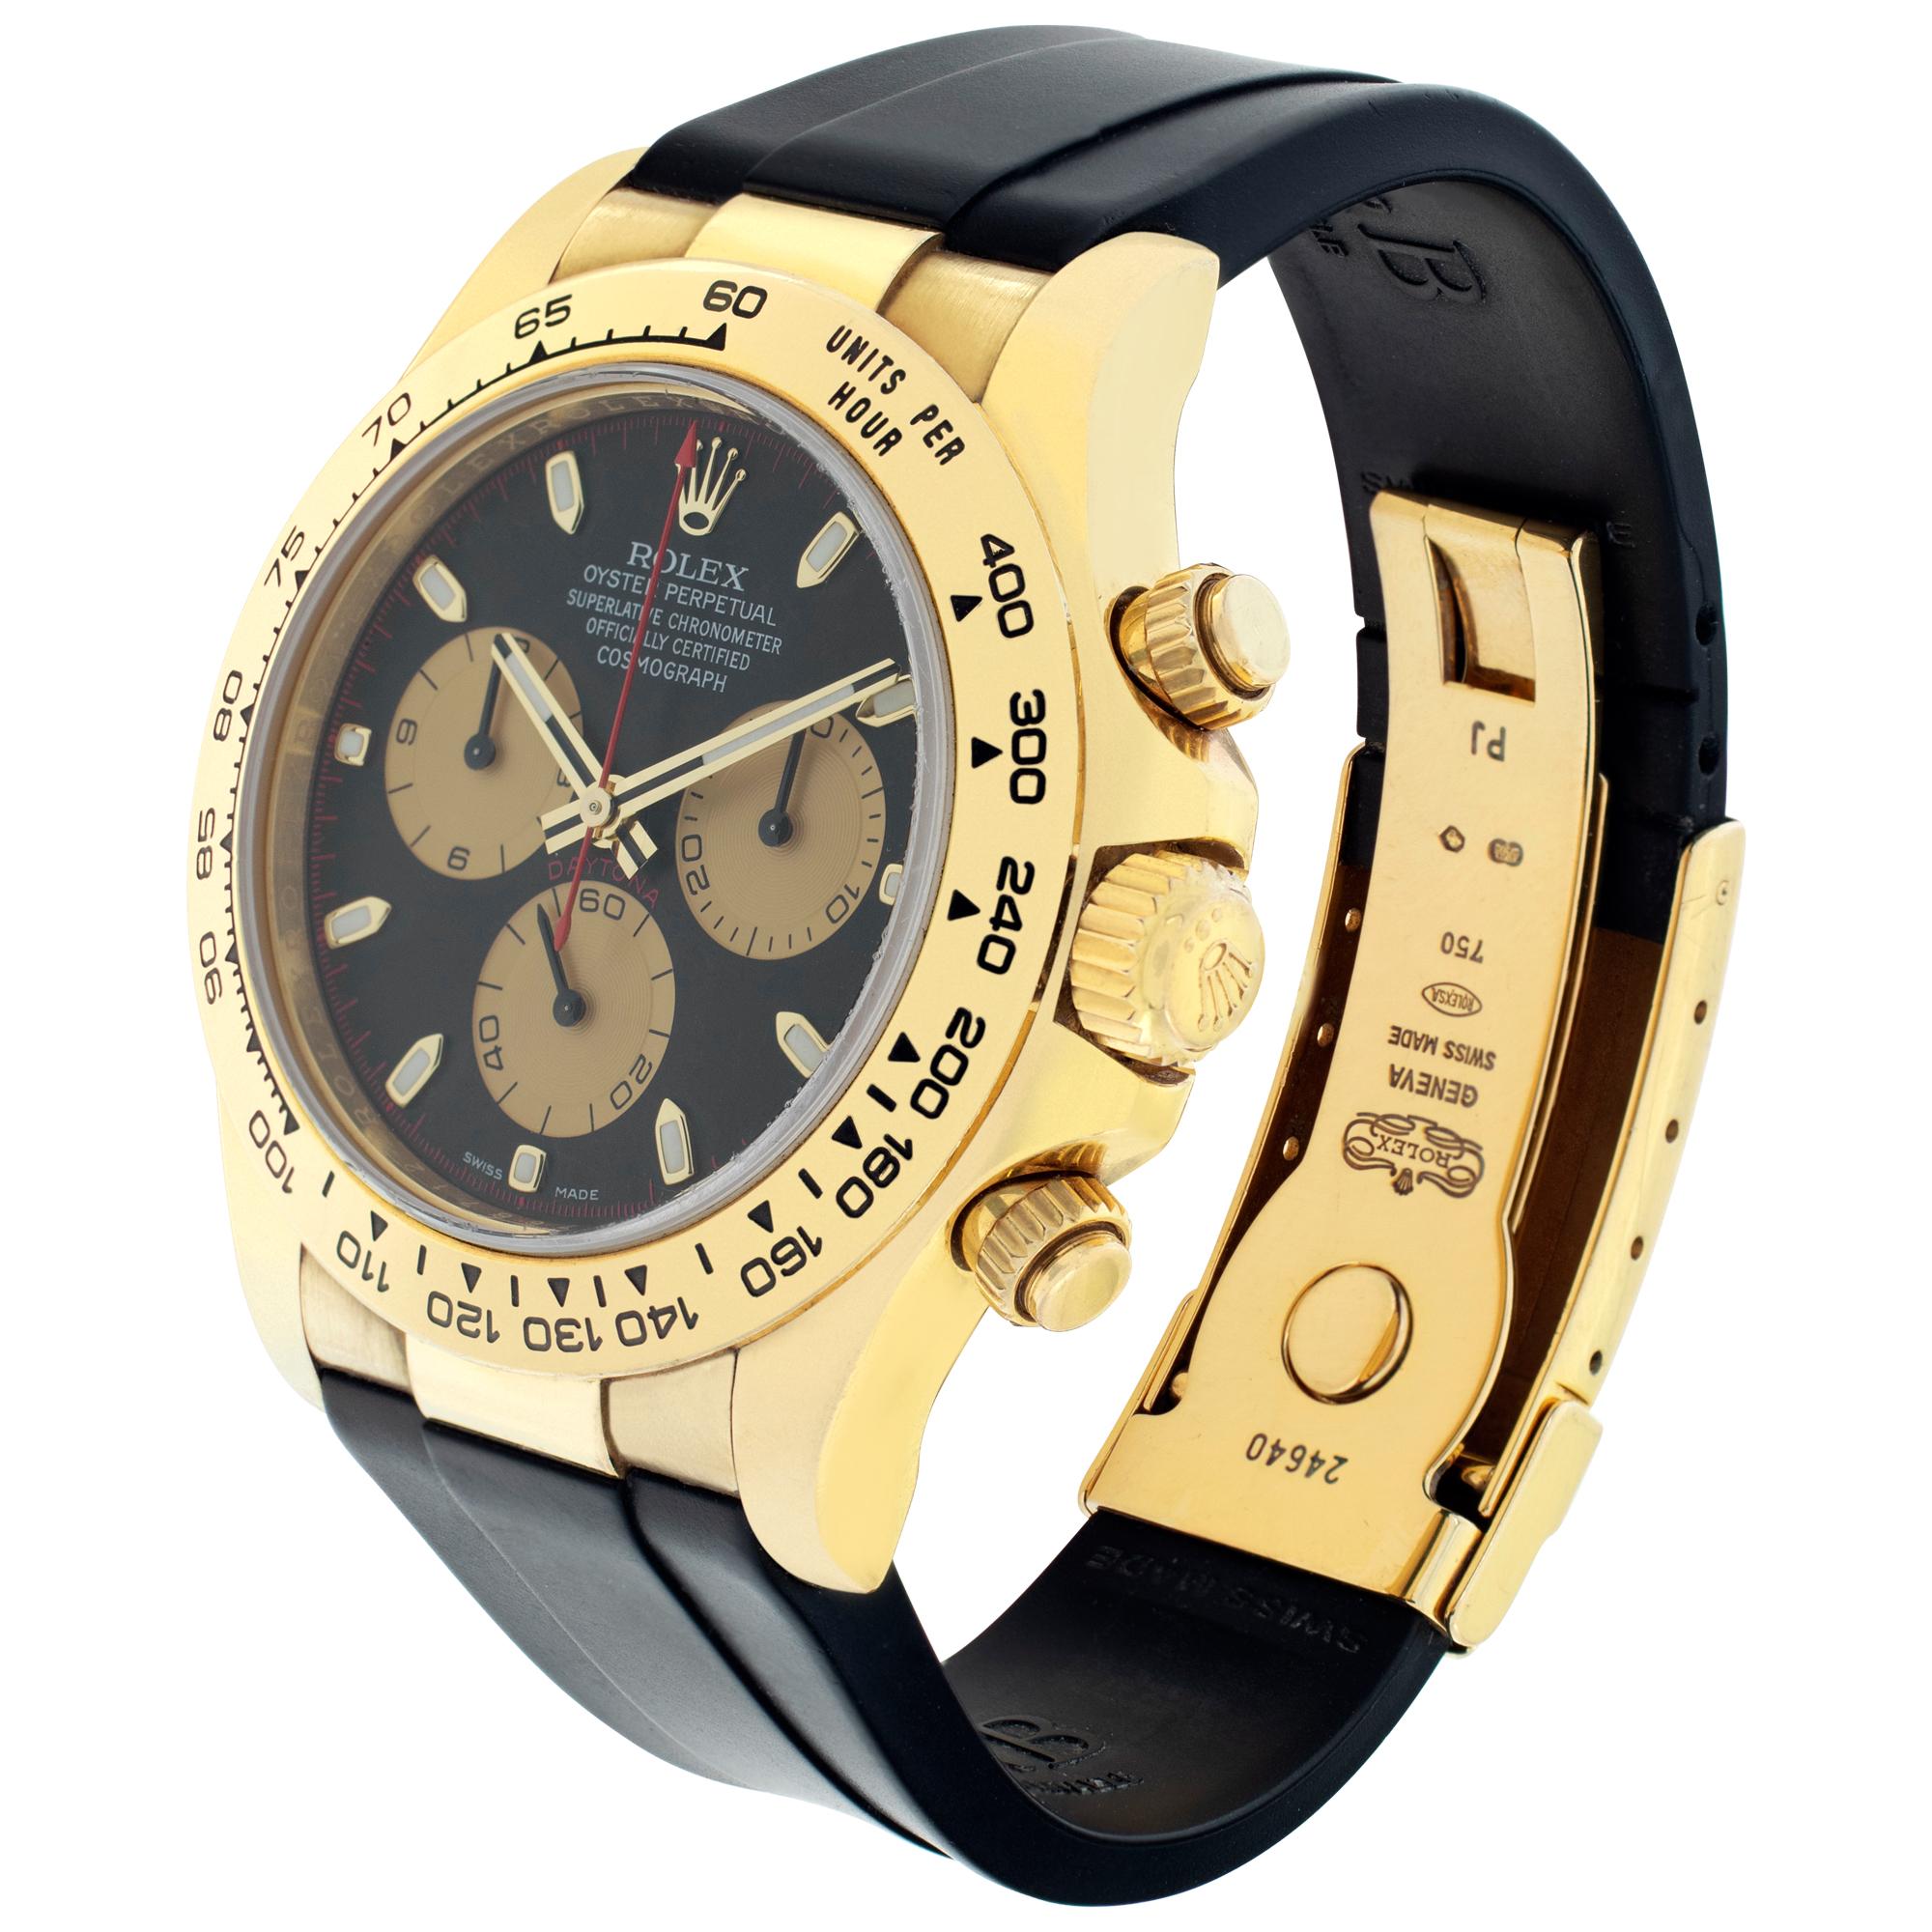 Unpolished, with original signs of wear. Rolex Daytona with a Paul Newman Dial in 18k yellow gold on a custom Rubber B black rubber strap with original Rolex 18k deployant buckle. Auto w/ sweep seconds and chronograph. 40 mm case size. Circa 2007.